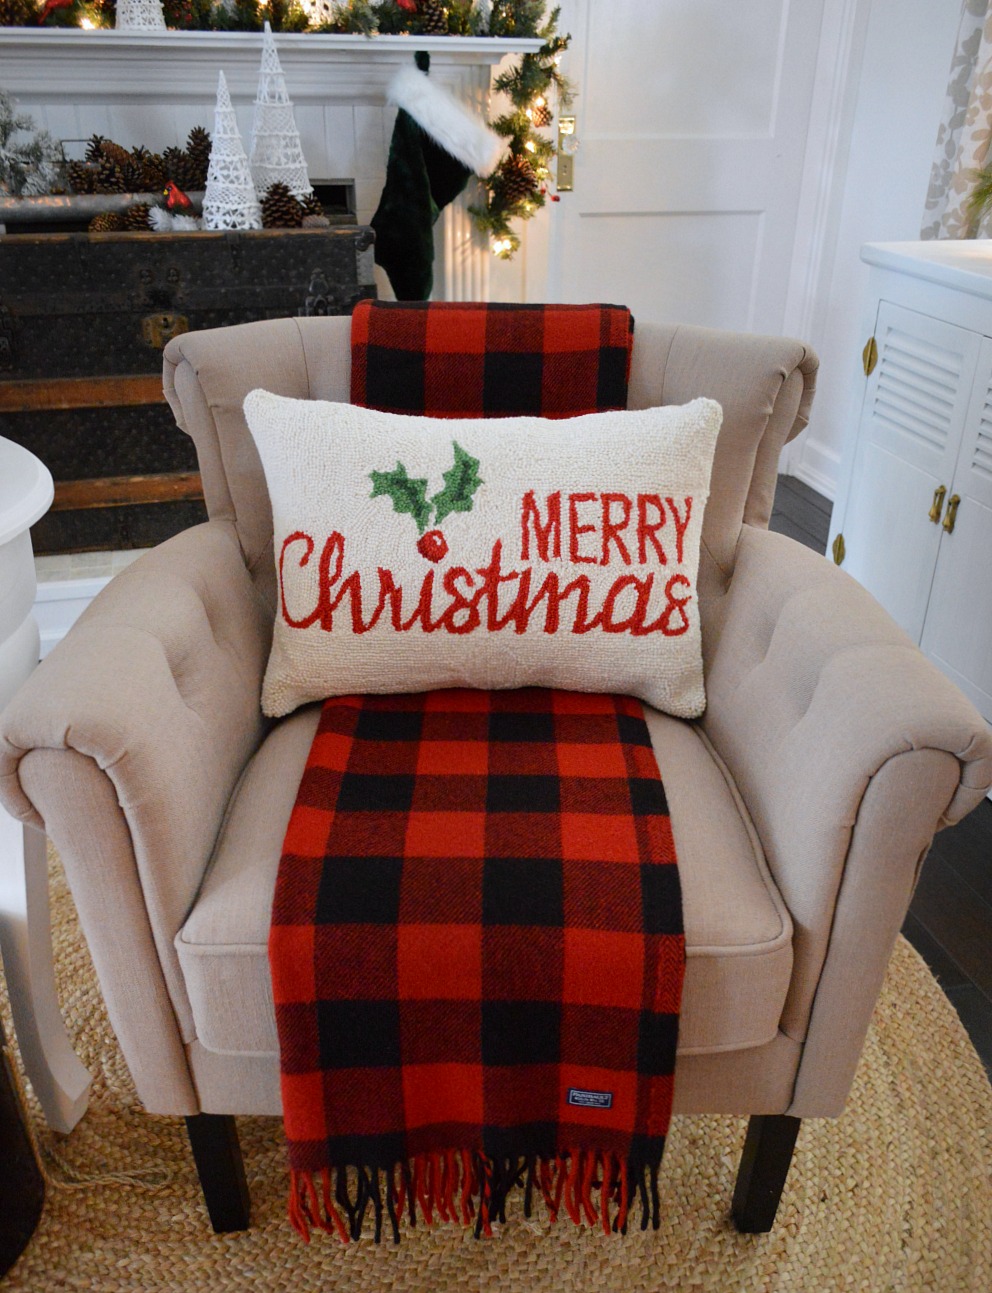 Holiday Housewalk Christmas at the cottage - Fox Hollow Cottage Home Tour - Merry Christmas Wool Pillow and Plaid Throw Blanket